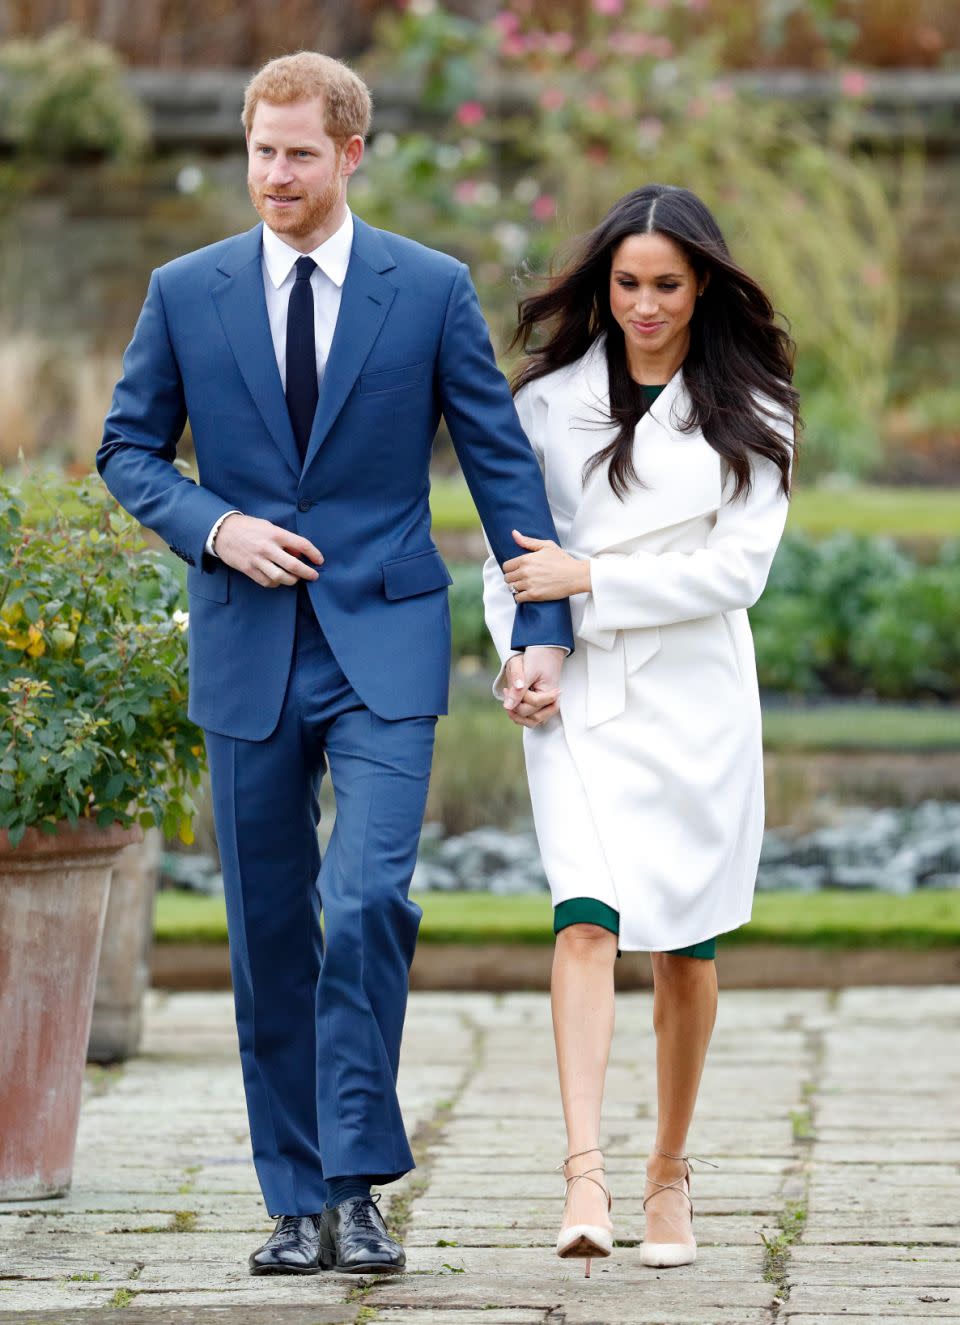 The upcoming royal wedding has of course ramped up interest in Markle’s wardrobe. Source: Getty